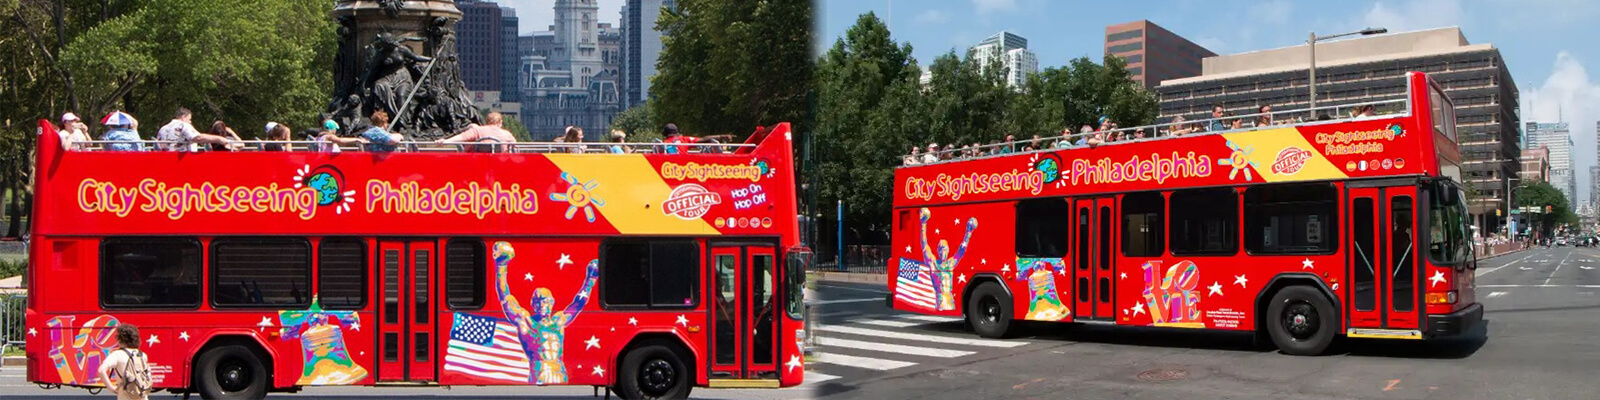 City Sightseeing Hop-On Hop-Off Philadelphia Coupons